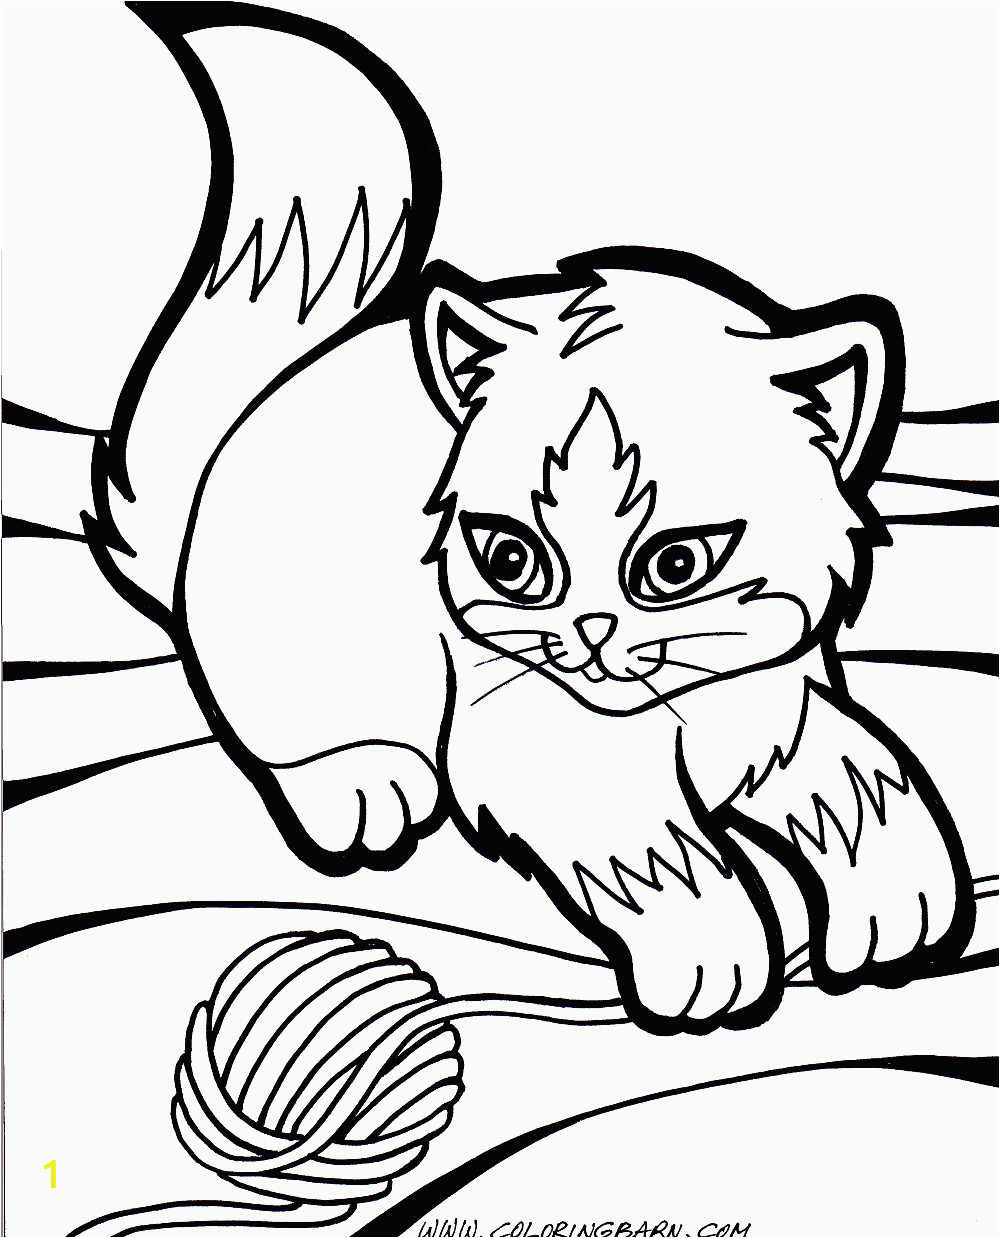 Free Coloring Pages Of Puppies and Kittens Free Kitten and Puppy Coloring Pages to Print Download